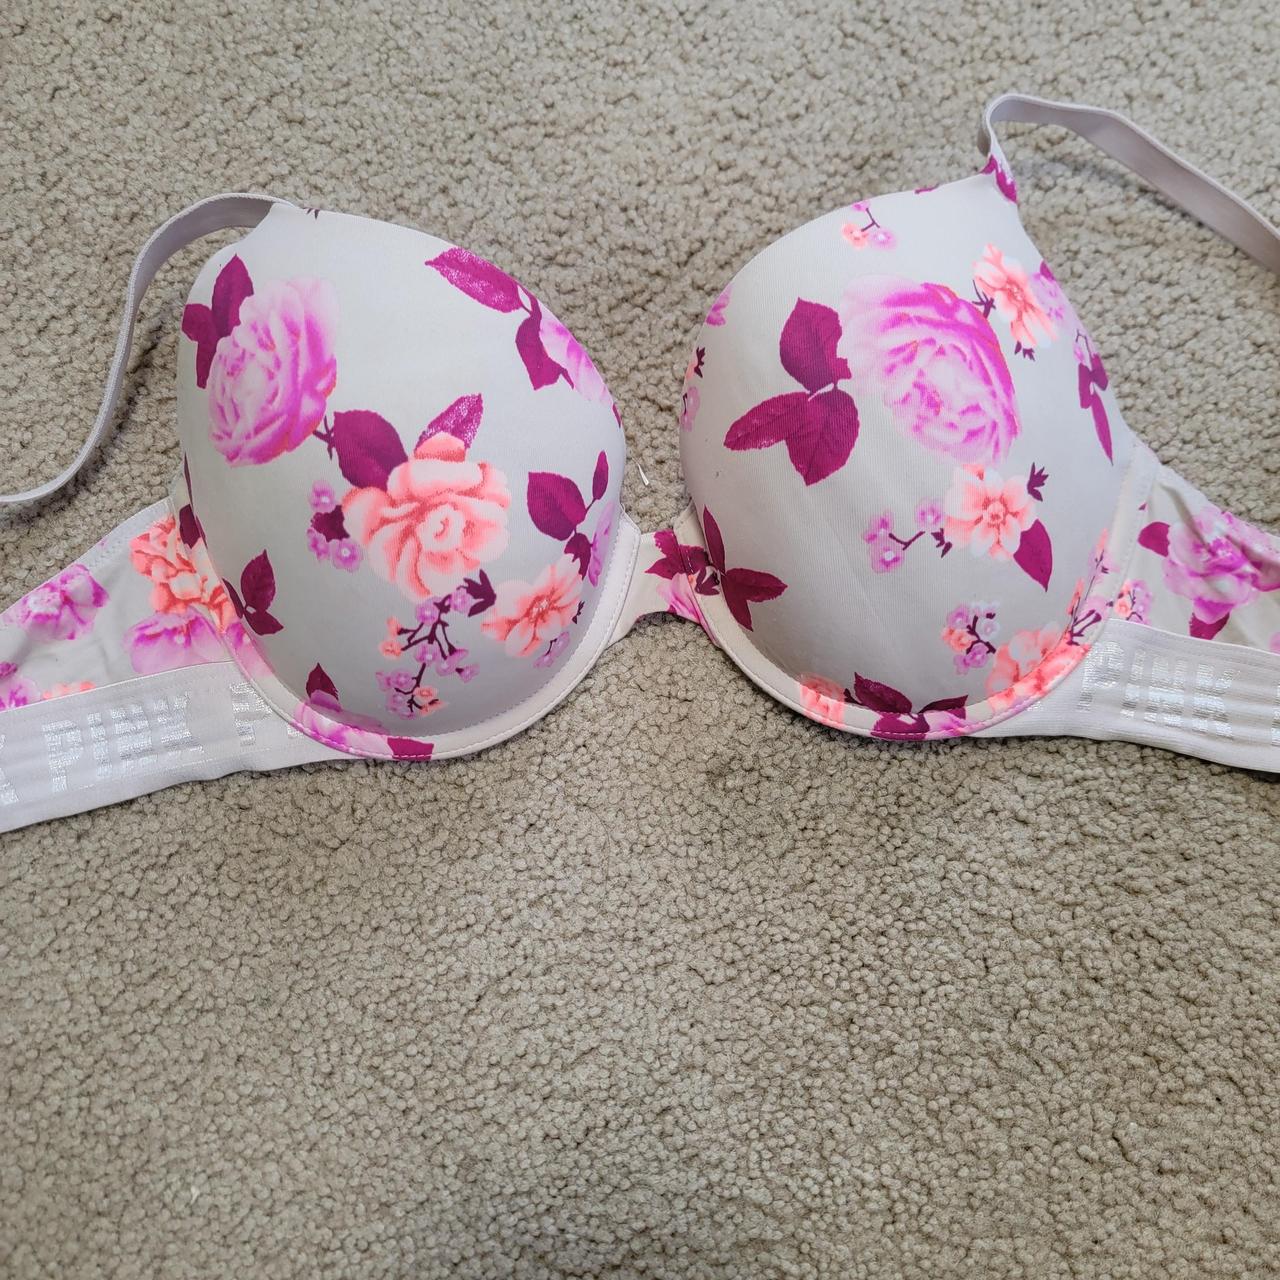 PINK Victoria Secret everywhere pushup size 34D